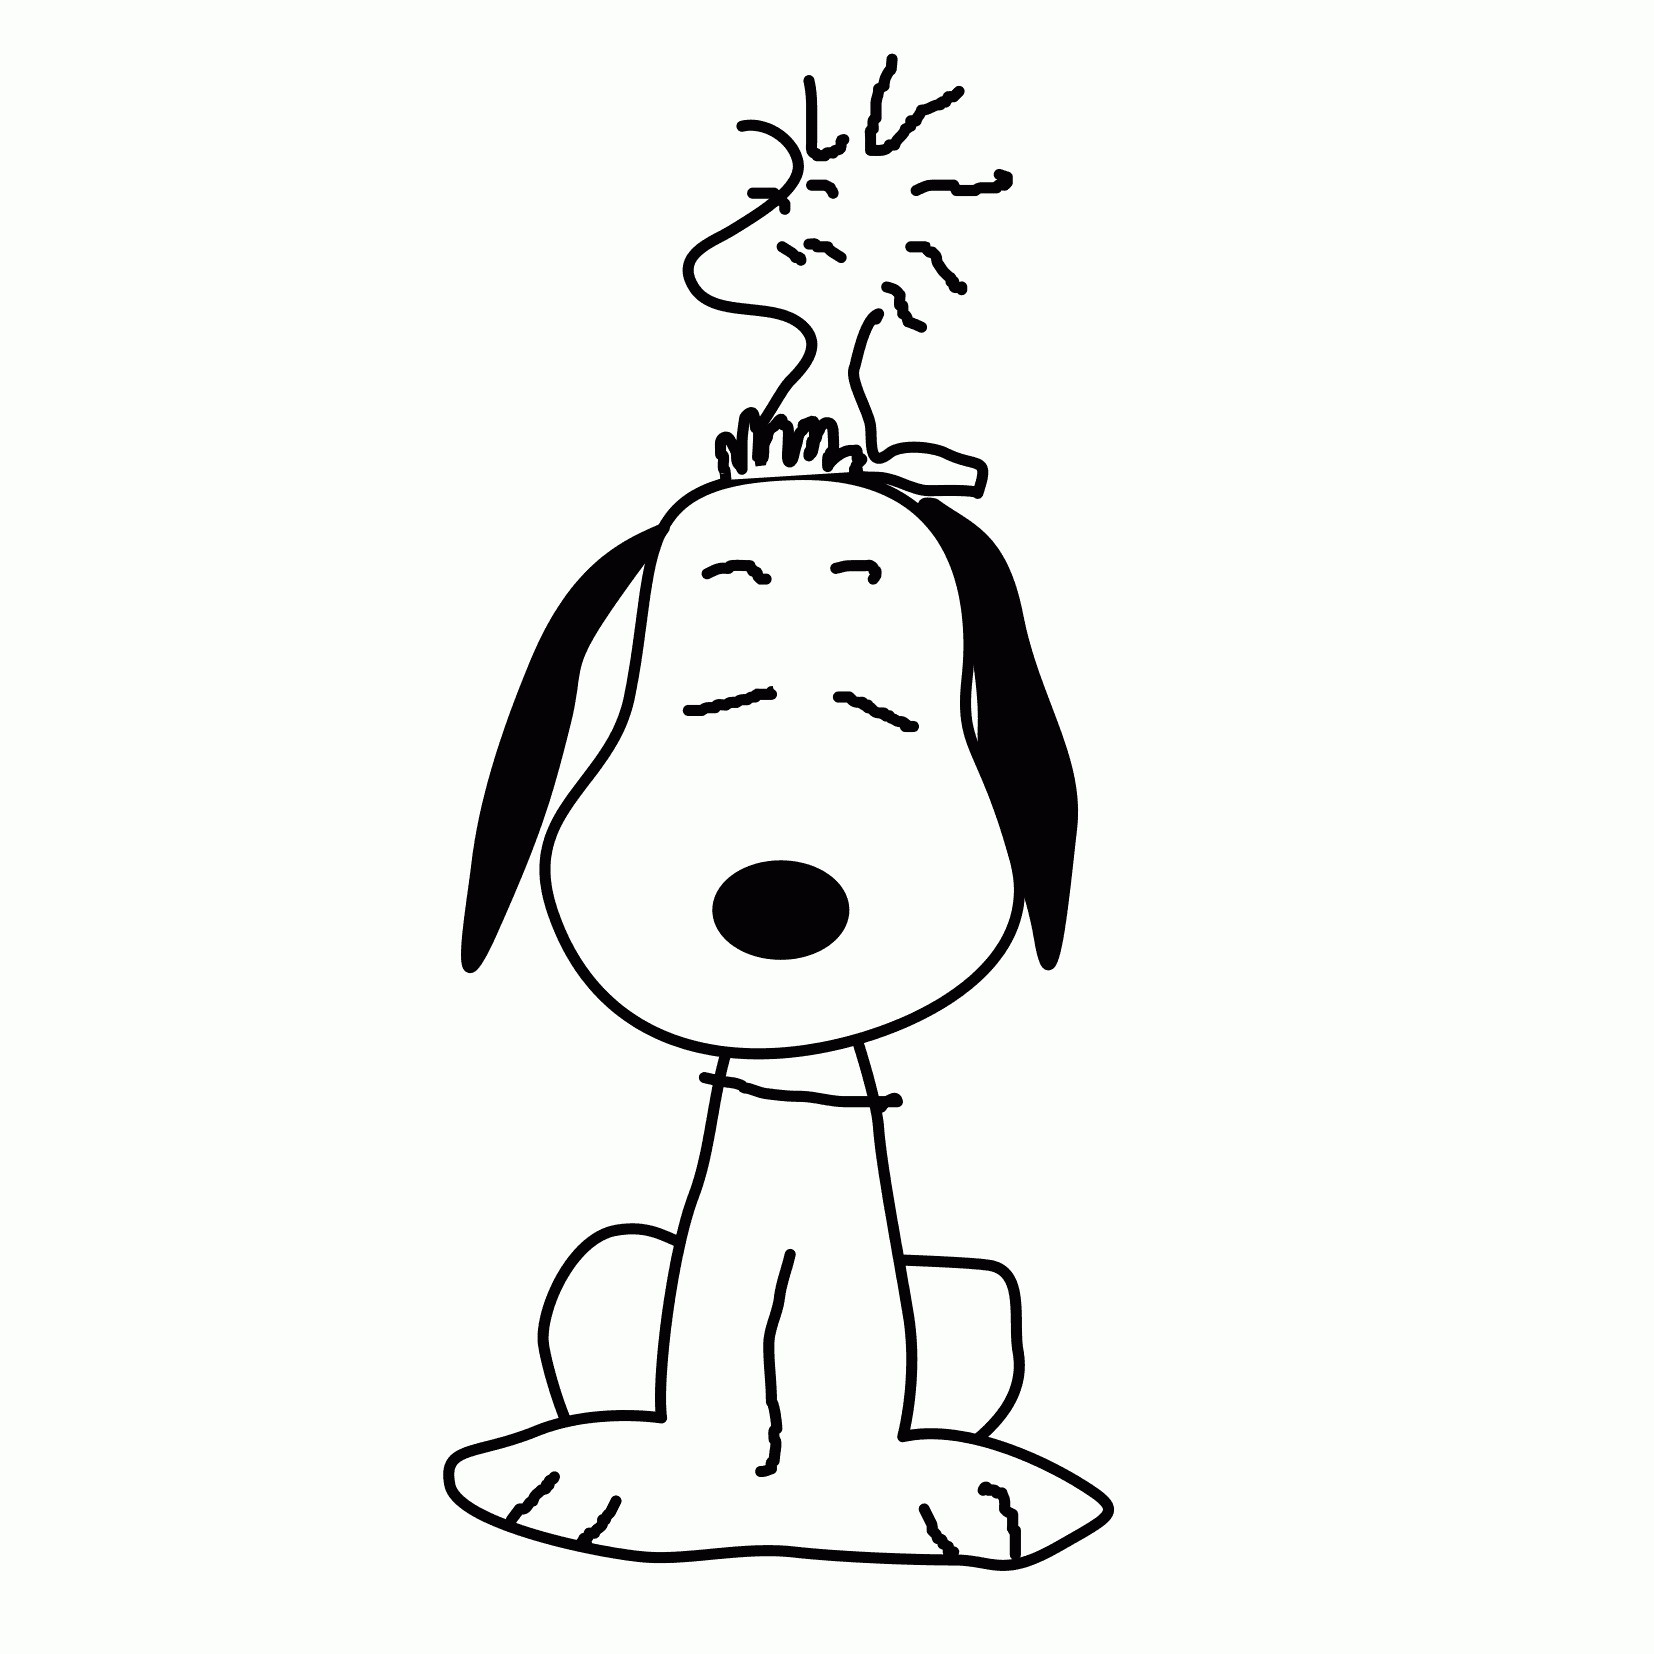 Snoopy Coloring Page - Coloring Pages for Kids and for Adults